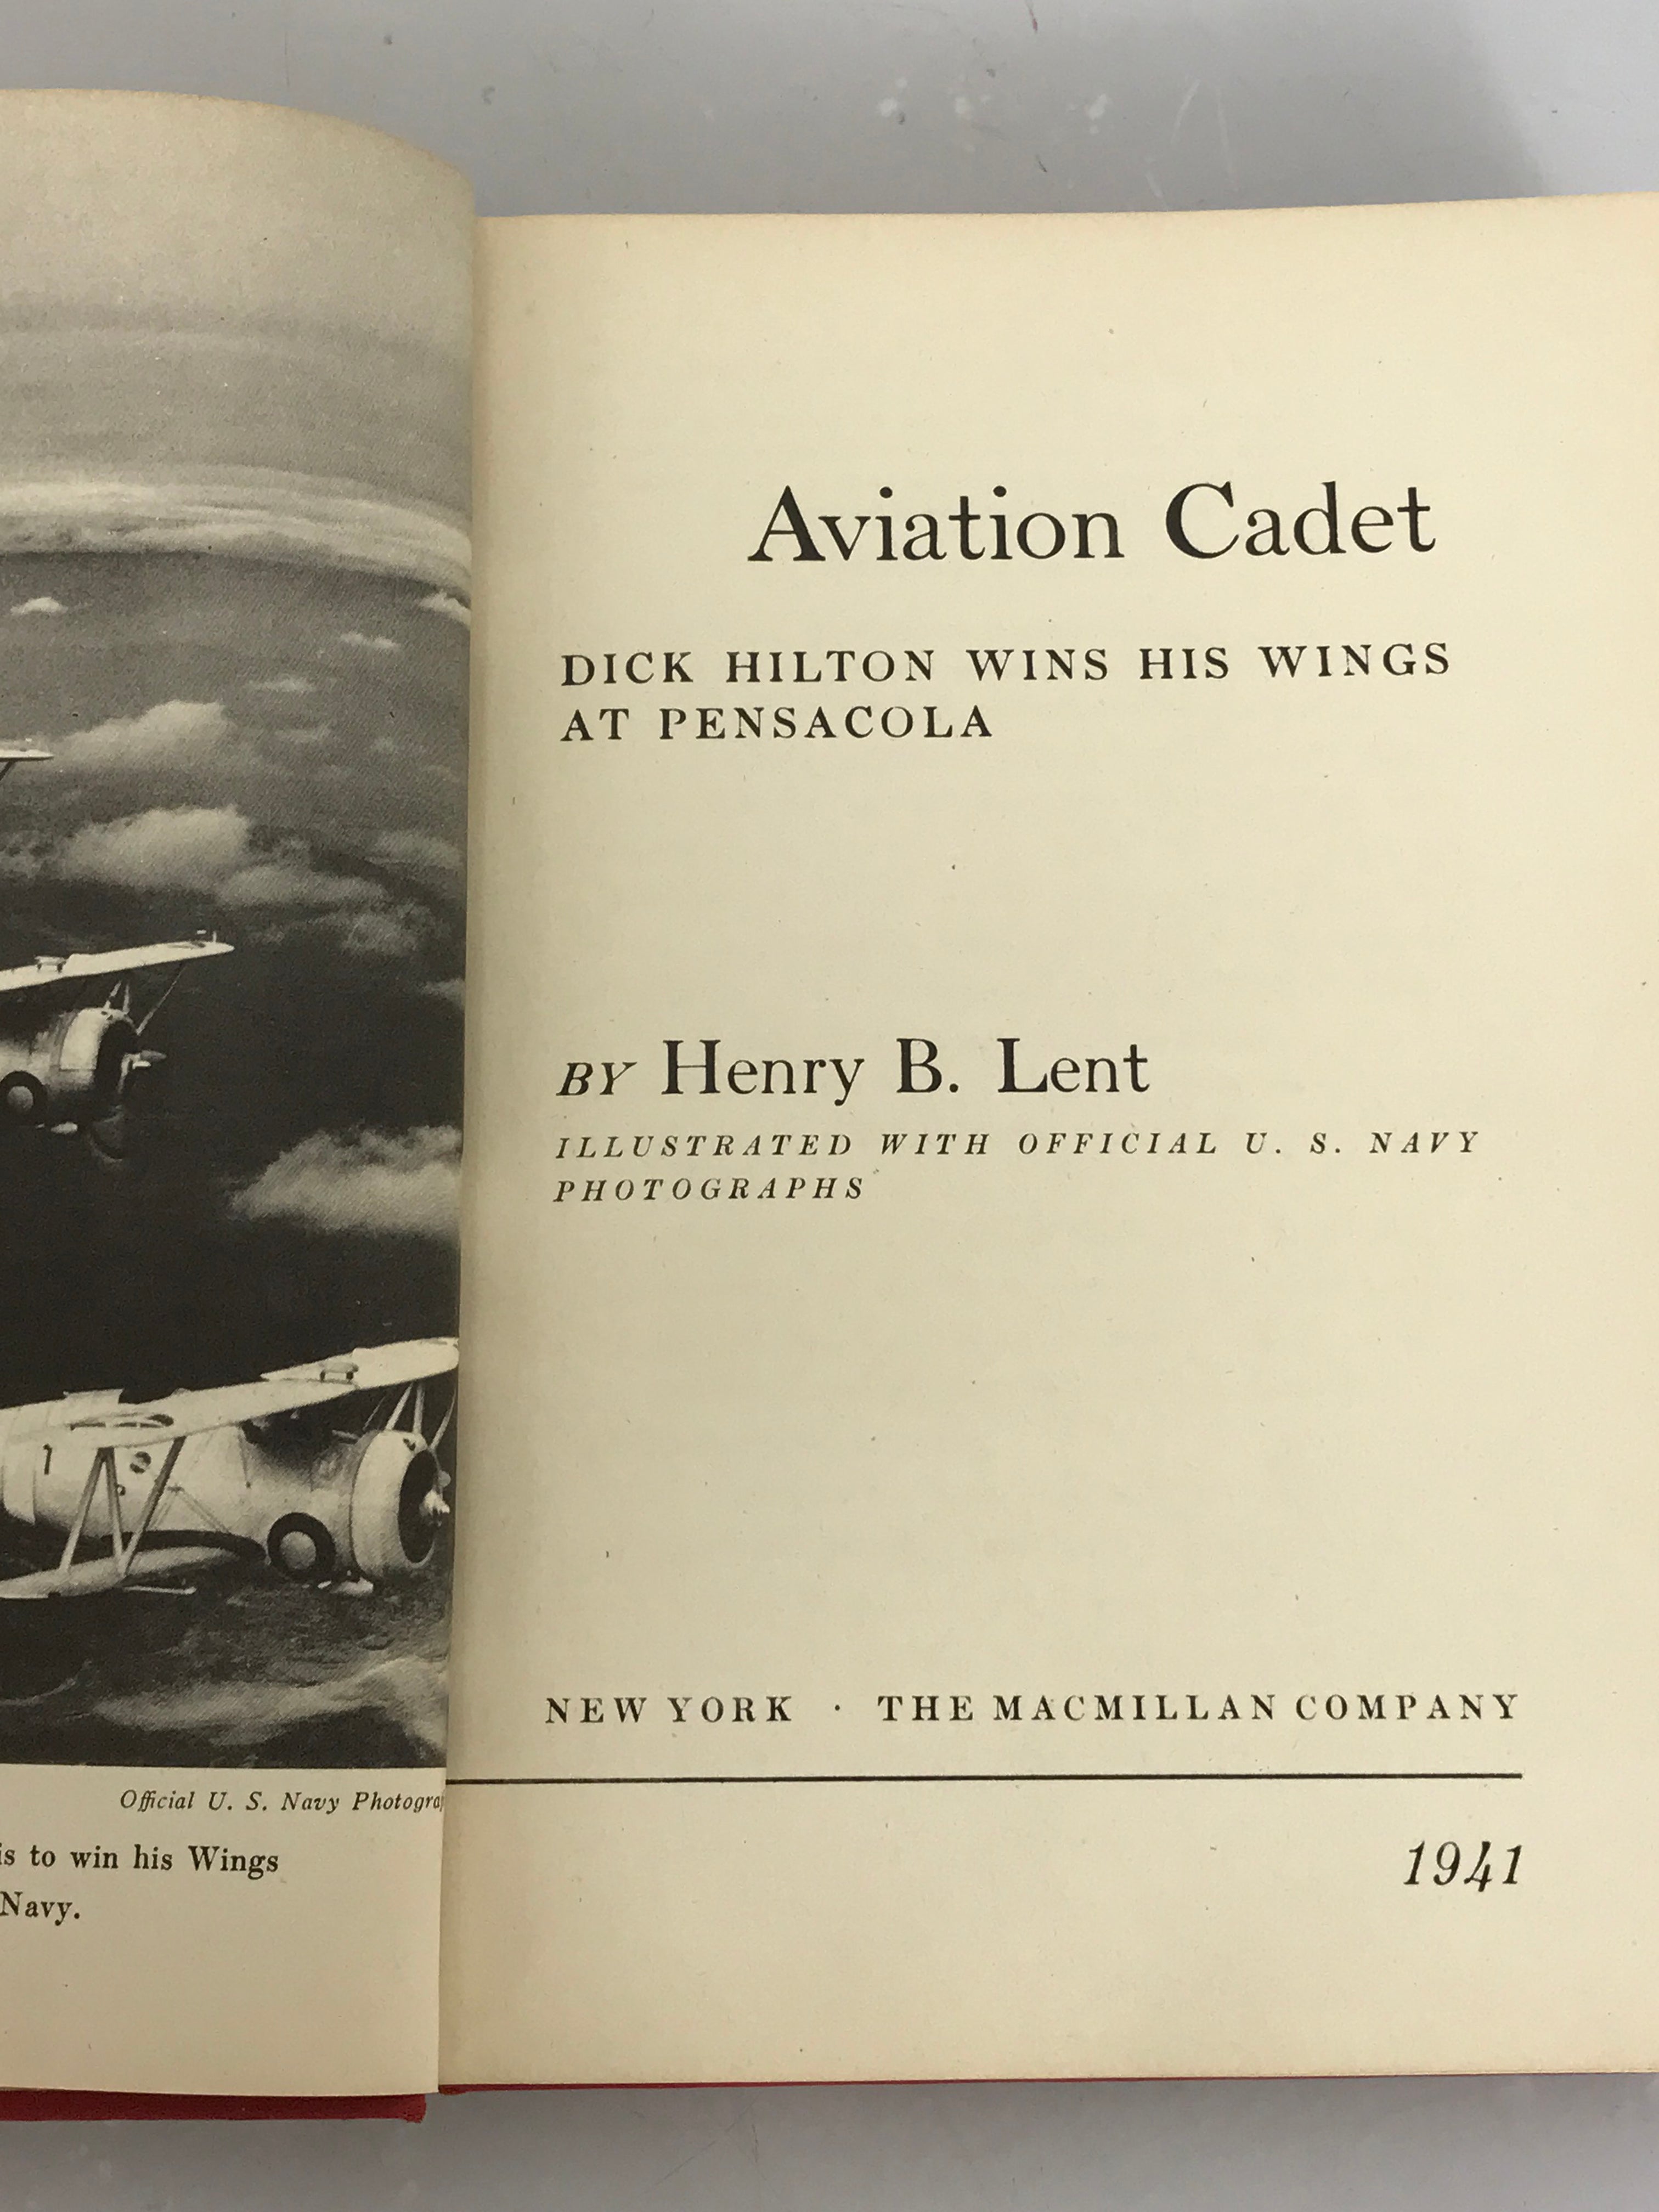 Aviation Cadet by Henry B. Lent With Official U.S. Navy Photographs 1943 HC